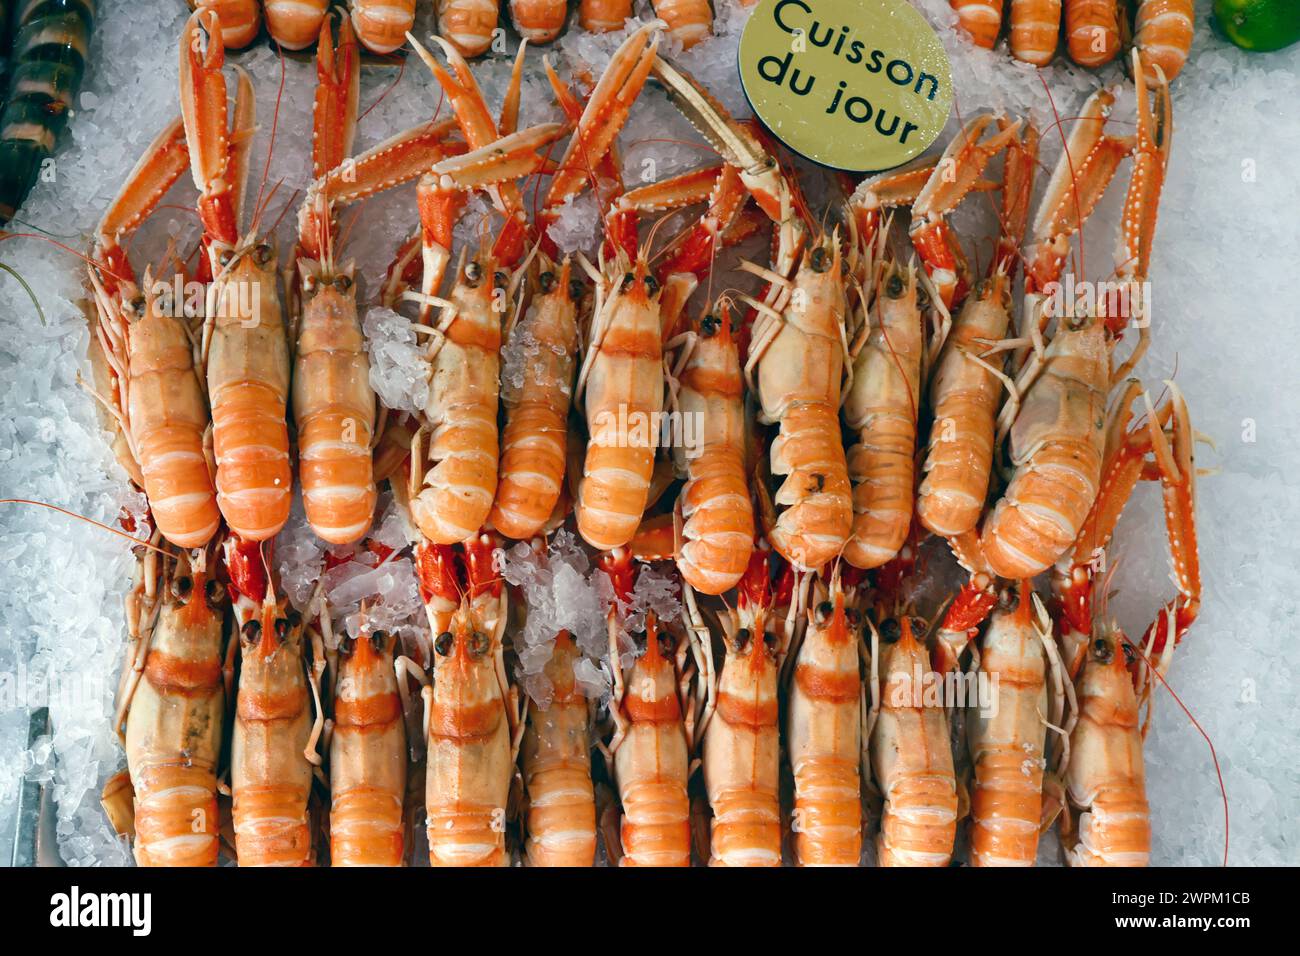 Fresh langoustine for sale at traditional fish market, Trouville, Normandy, France, Europe Stock Photo